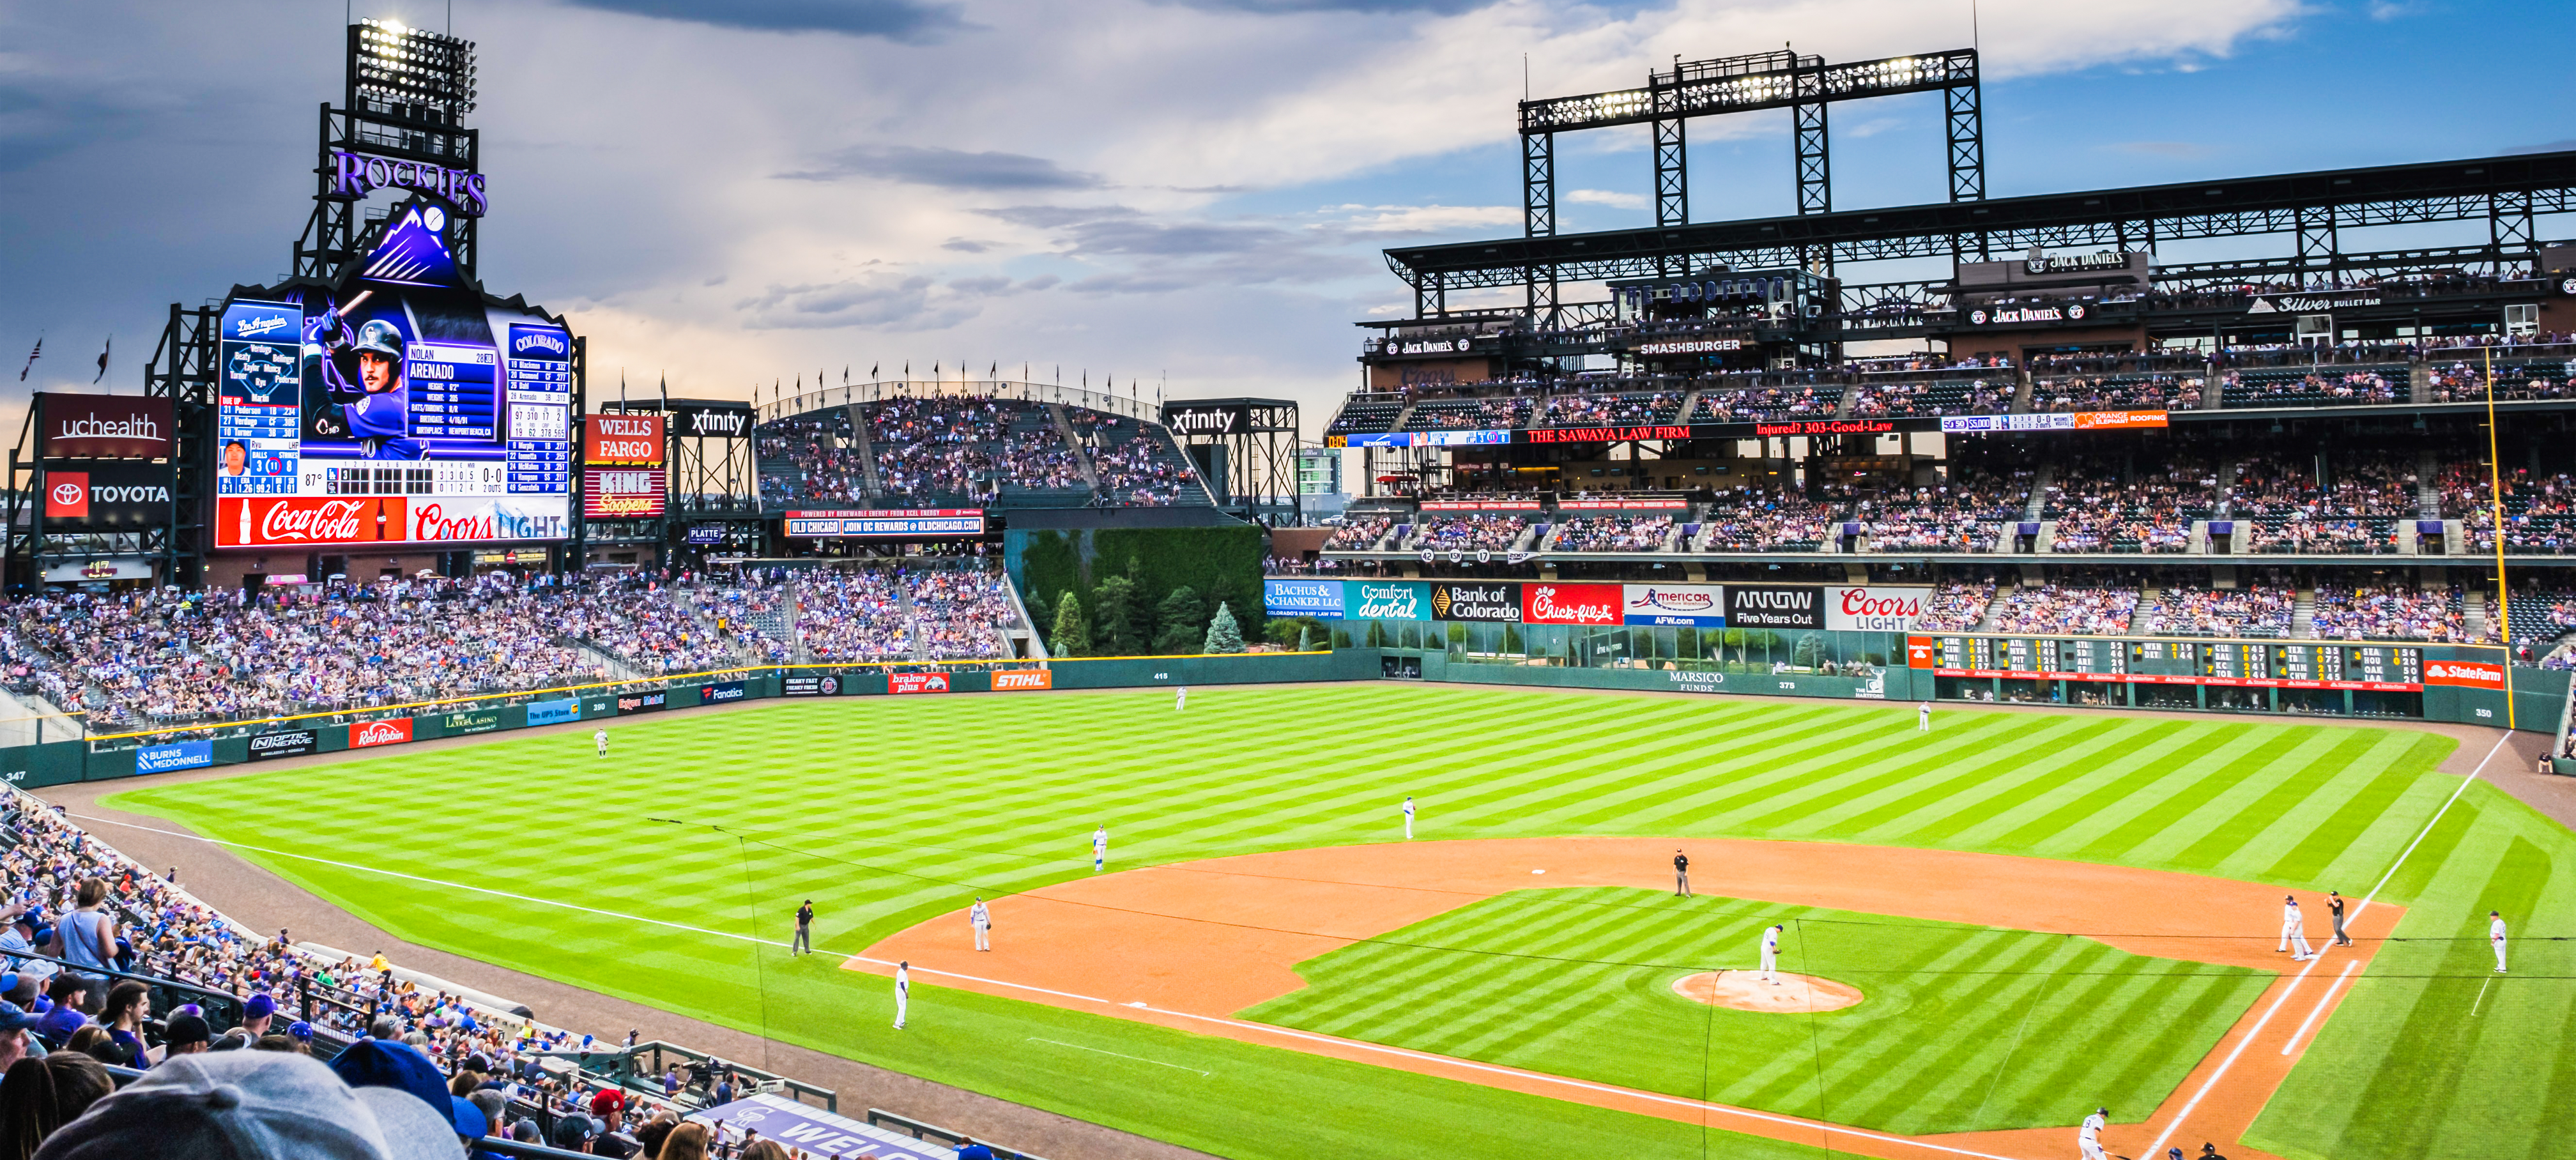 Coors Field during an evening baseball game as seen from the stands